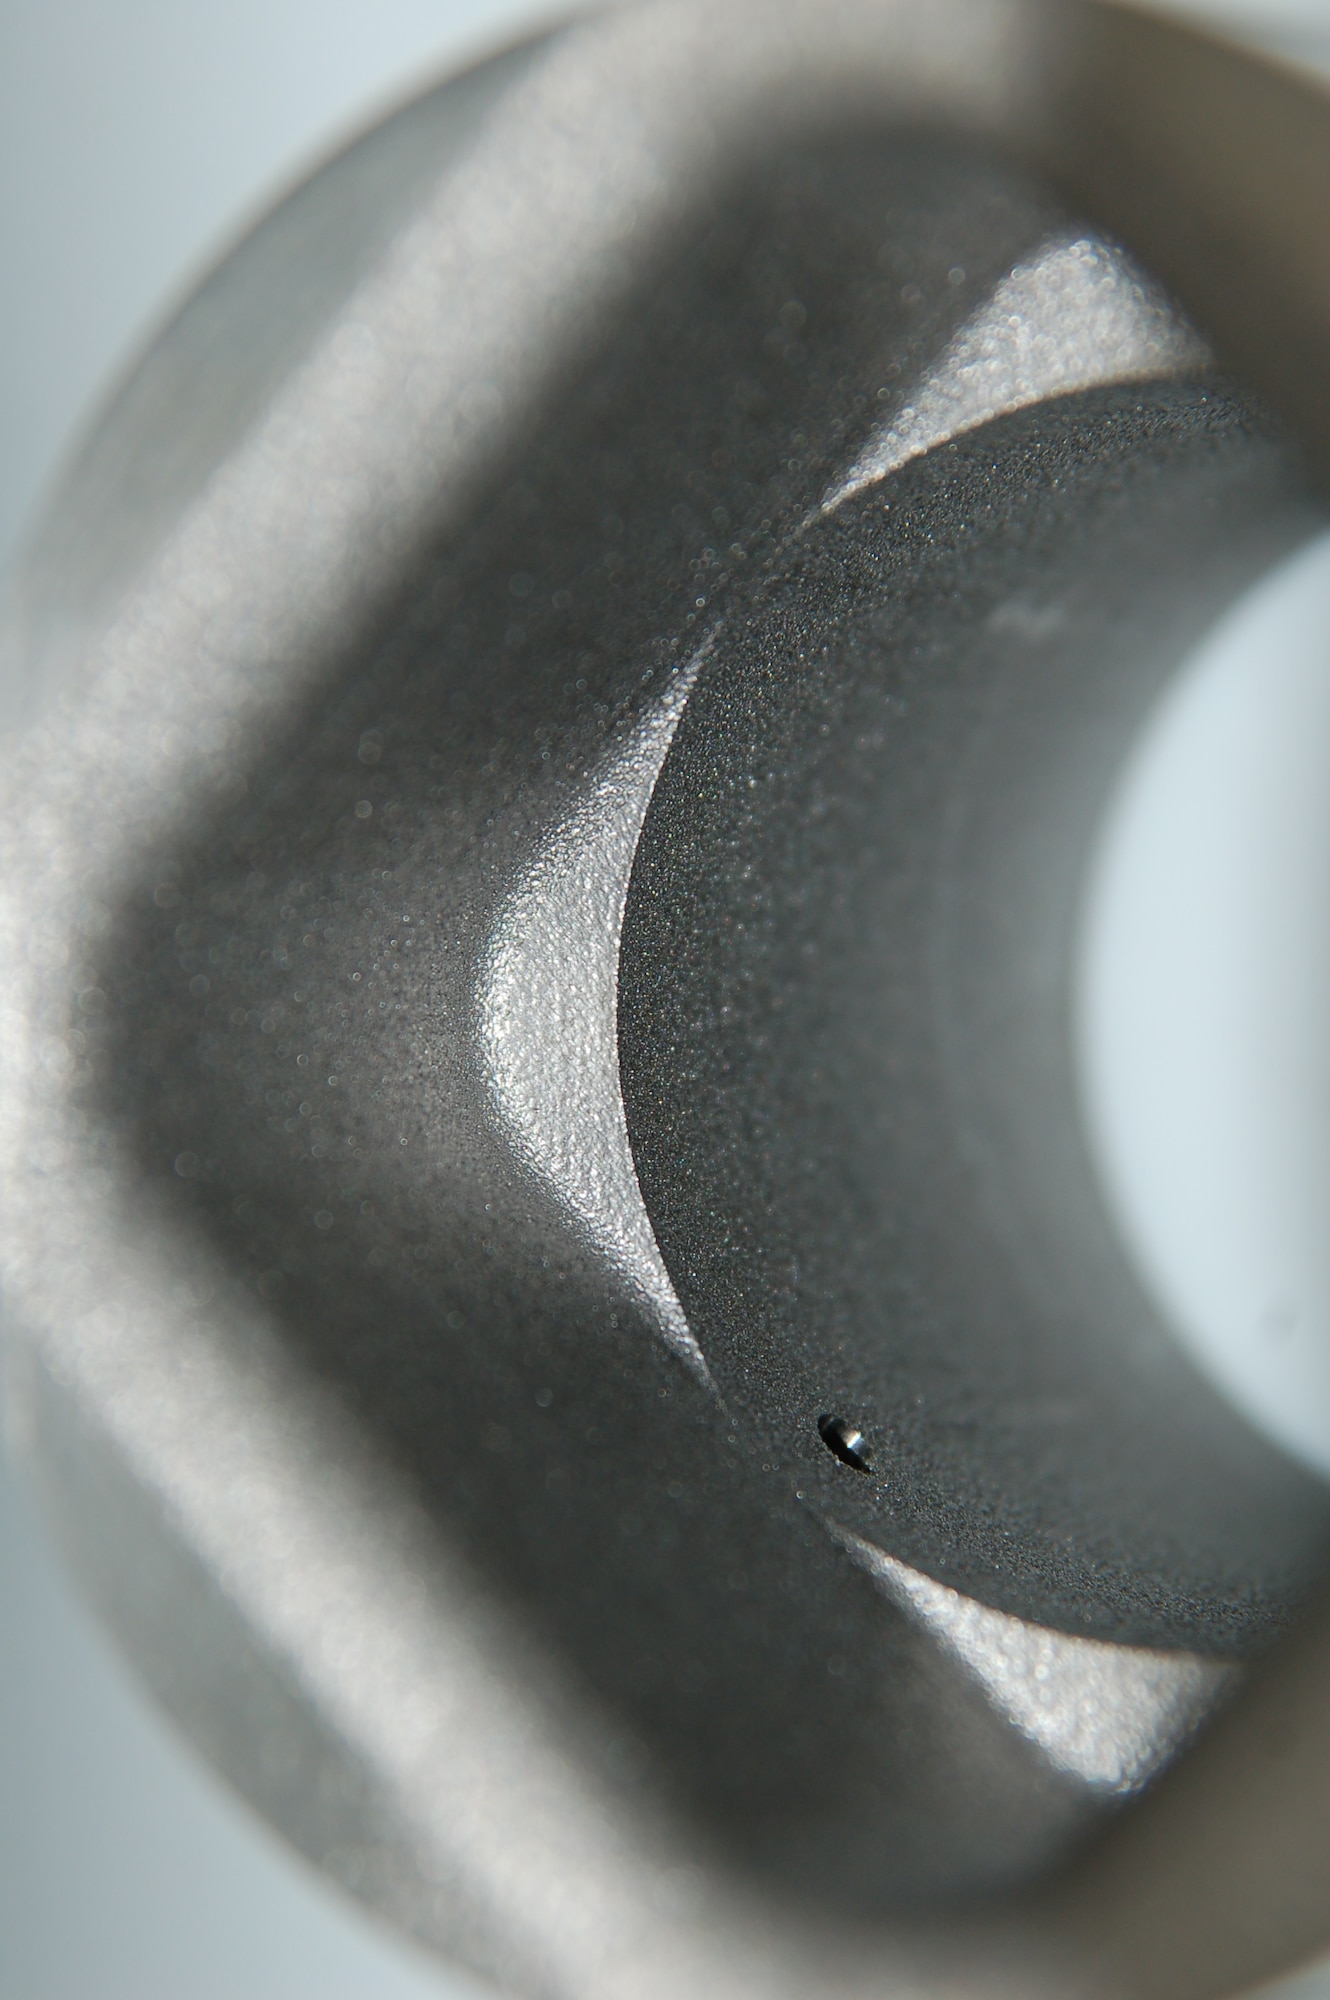 Pictured is an up-close view of a petal orifice liner created at Arnold Engineering Development Complex Hypervelocity Wind Tunnel 9 in White Oak, Maryland, using additive manufacturing, otherwise known as 3D printing. The liner is integral to high Mach number tunnel runs at Tunnel 9 and can experience temperatures of several thousand degrees. The refractive metal part has an outside diameter of around 3 inches, an inside diameter of around 2 inches and is nominally 3 inches in length. Additive manufacturing machines at Tunnel 9 are also capable of much larger prints, in the ballpark of 18 to 24 inches in any direction. (U.S. Air Force photo)